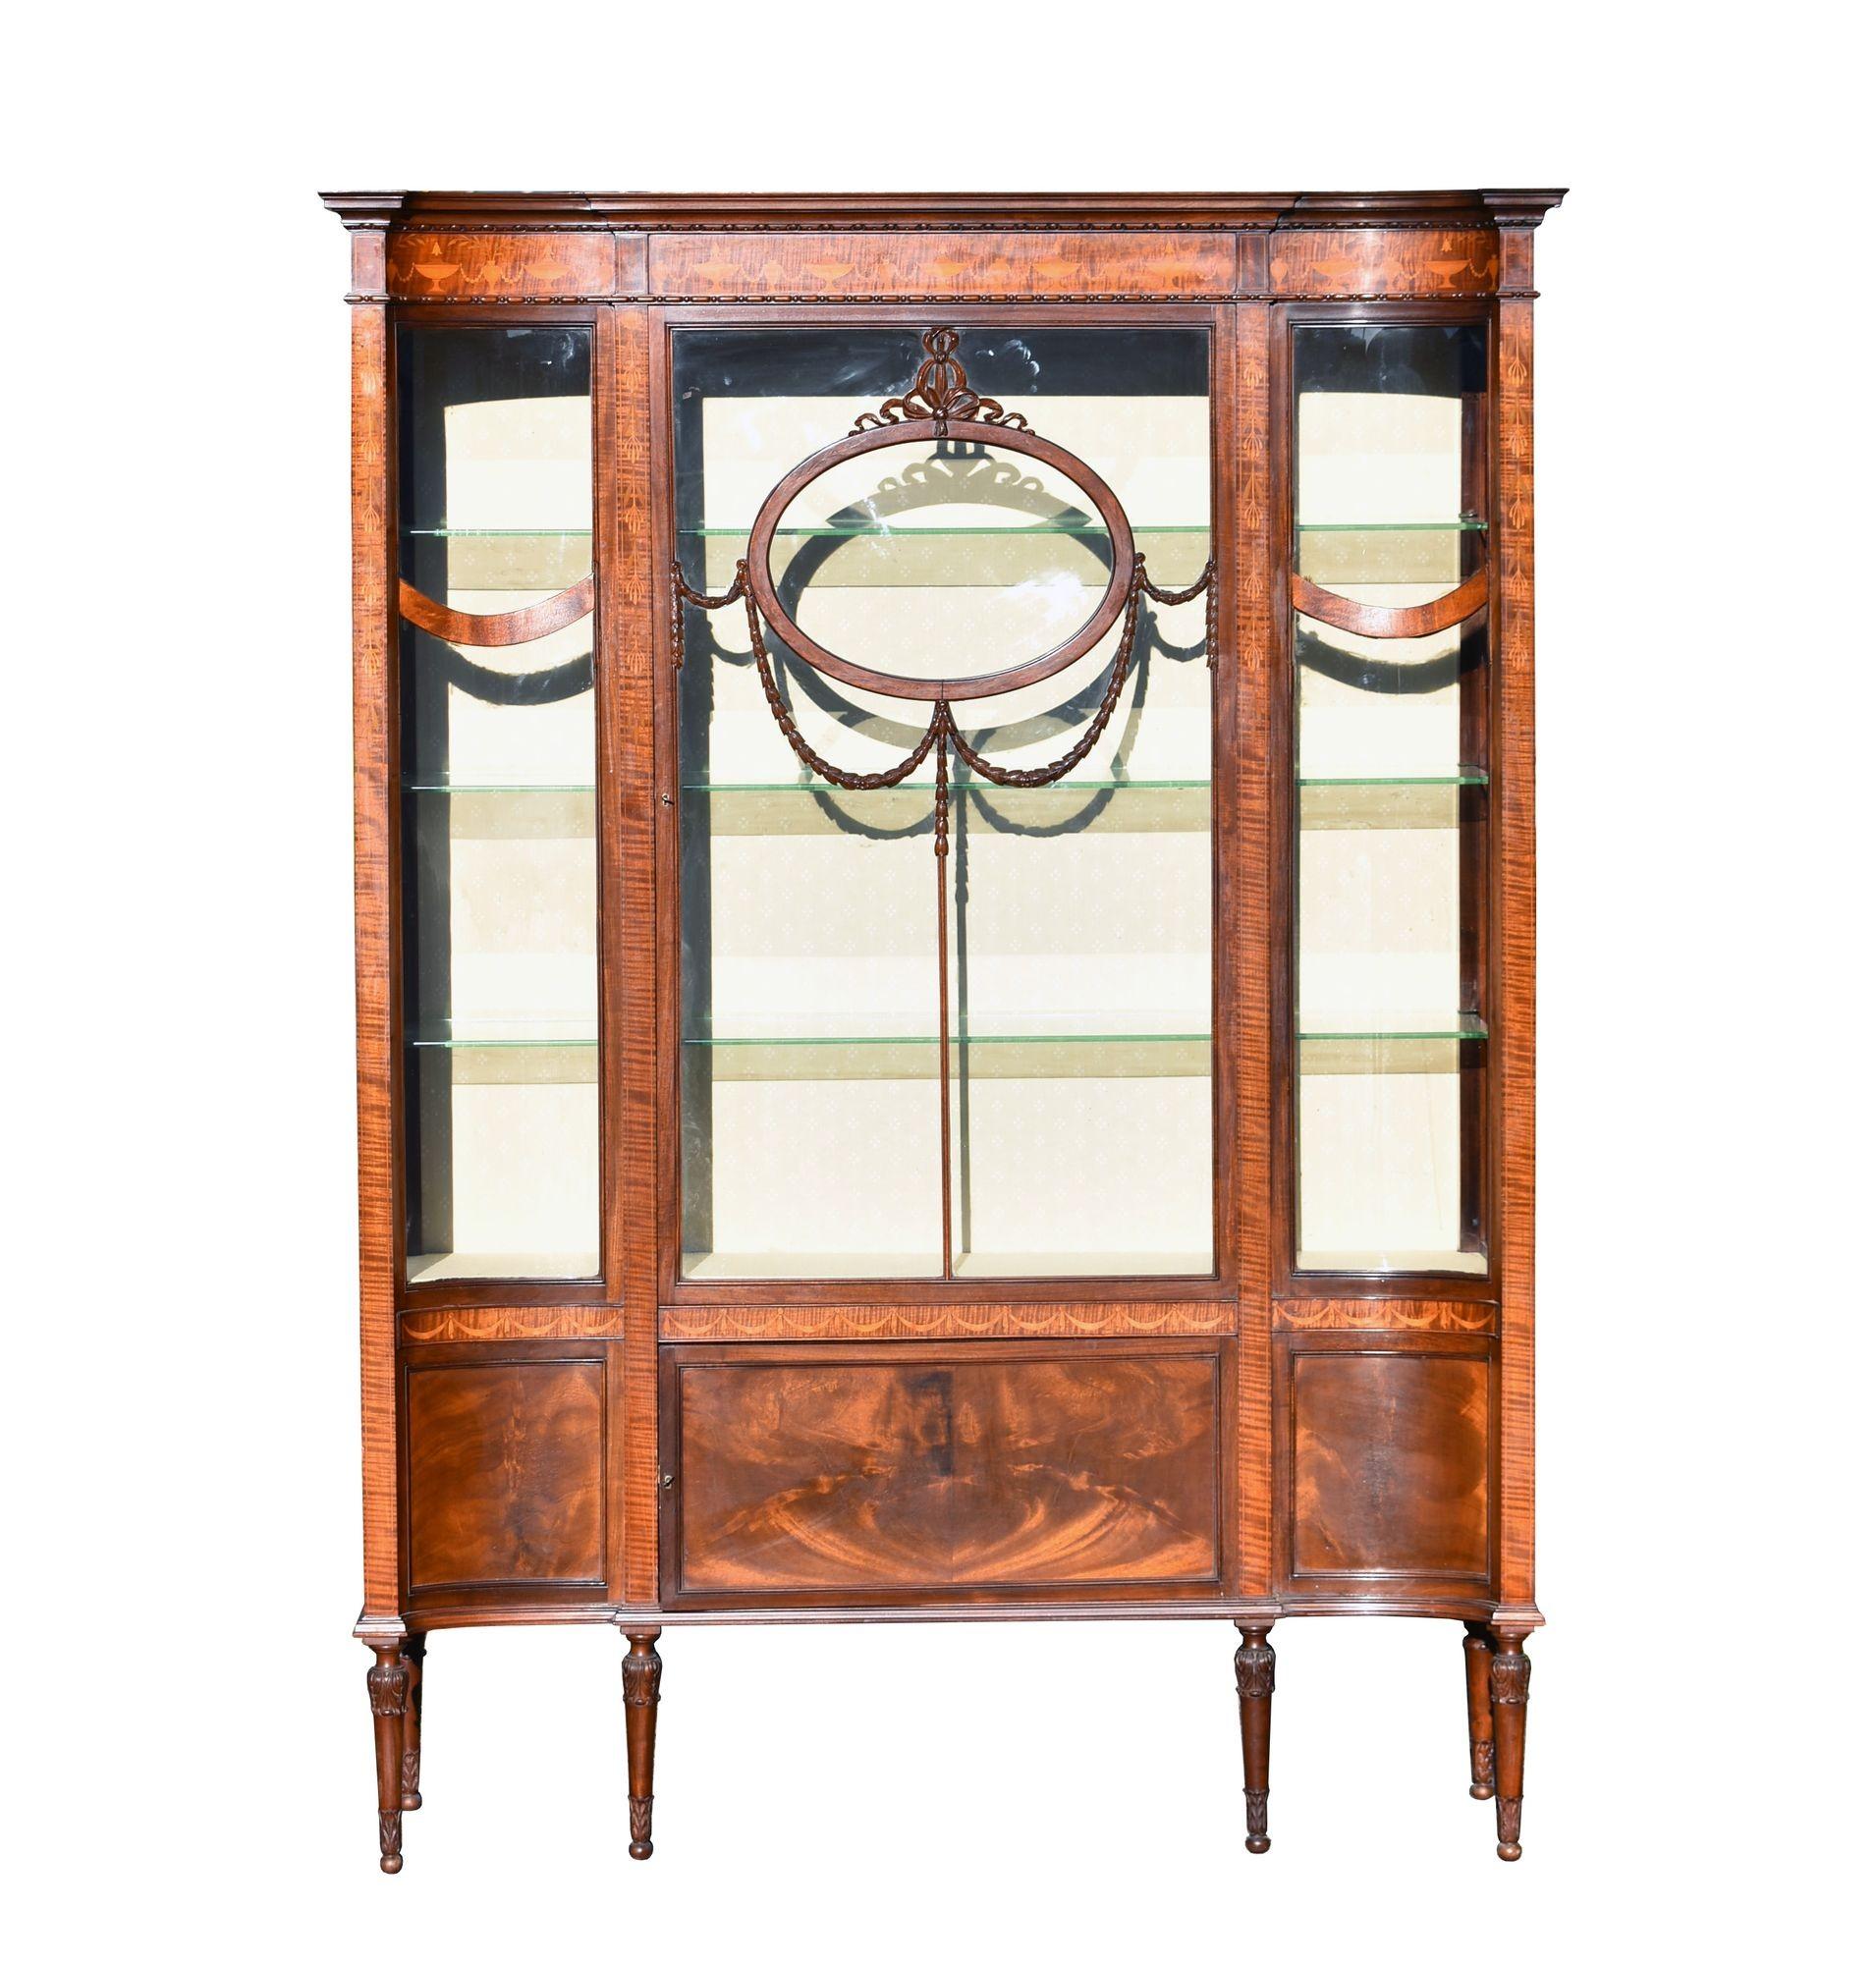 For sale is a good quality Edwardian mahogany inlaid display cabinet, having a single glazed door, above a cupboard, standing on elegant carved legs. The cabinet is in very good condition for its age.
Width: 129cm Depth: 39cm Height: 175cm